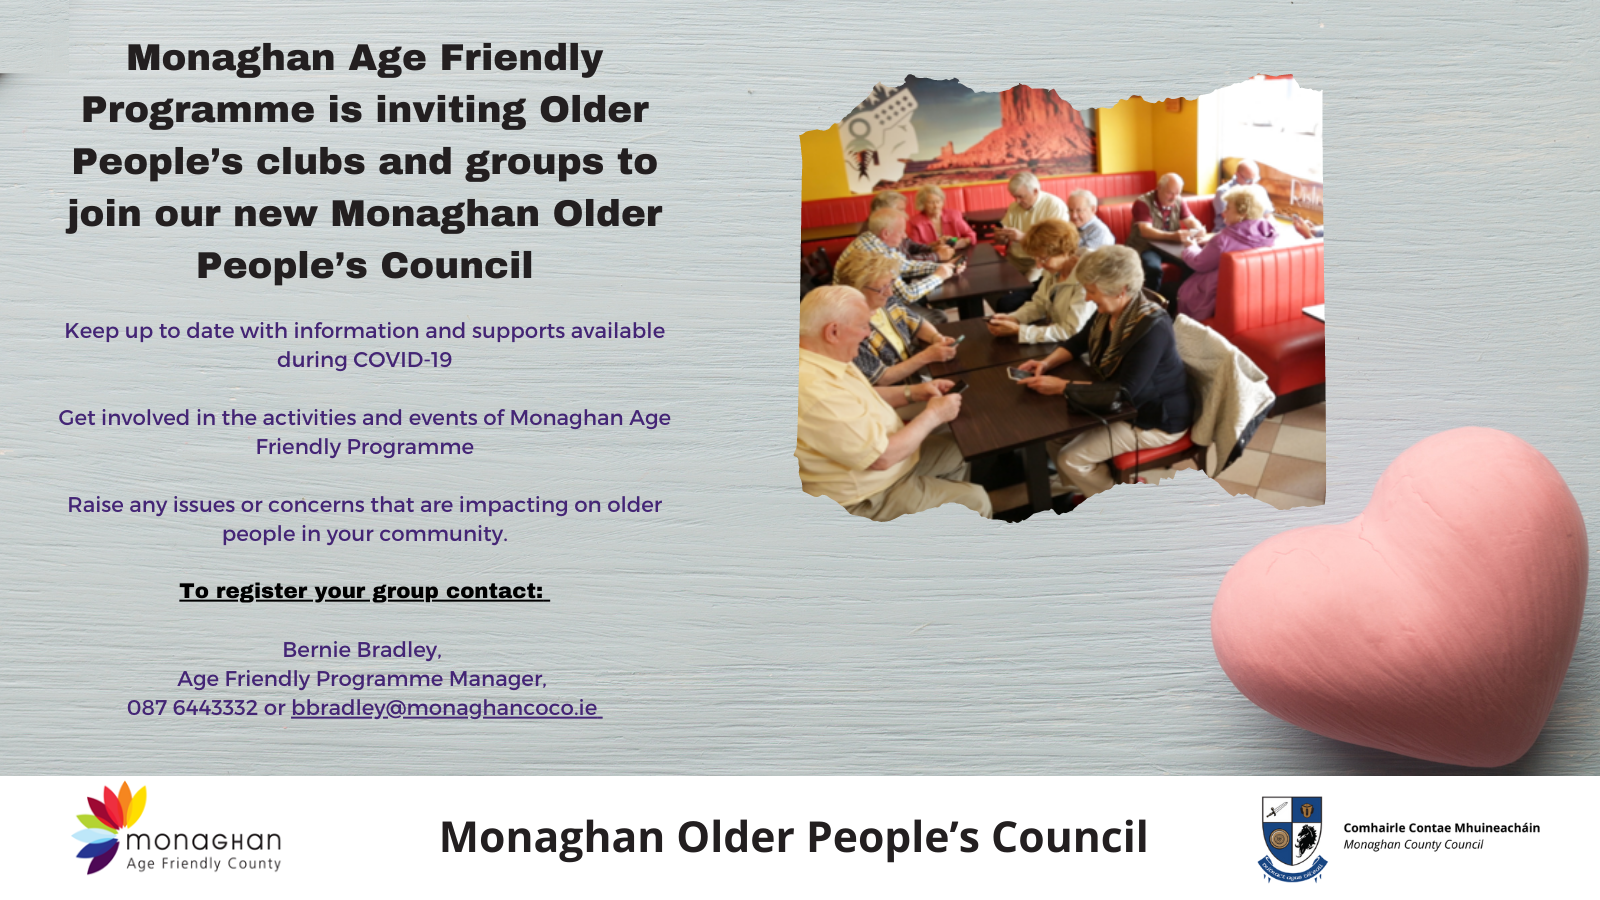 Monaghan Age Friendly Programme is inviting Older People’s clubs and groups to join our new Monaghan Older People’s Council